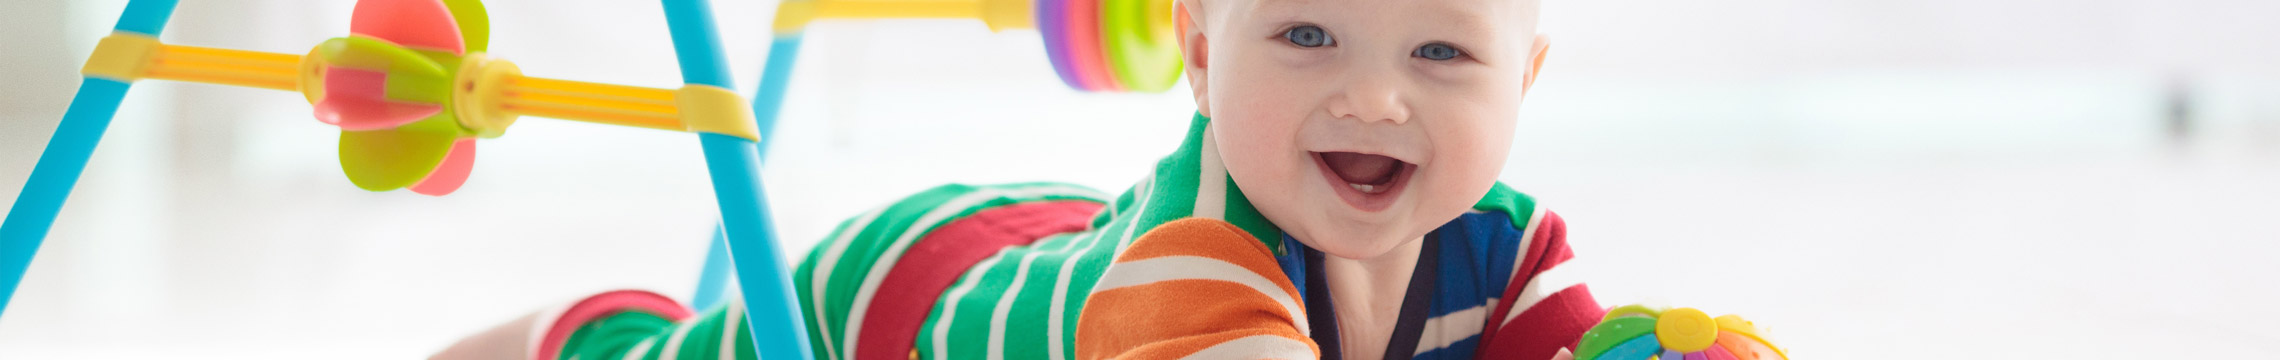 A smiling baby lays under a plastic play structure and plays with a colorful ball